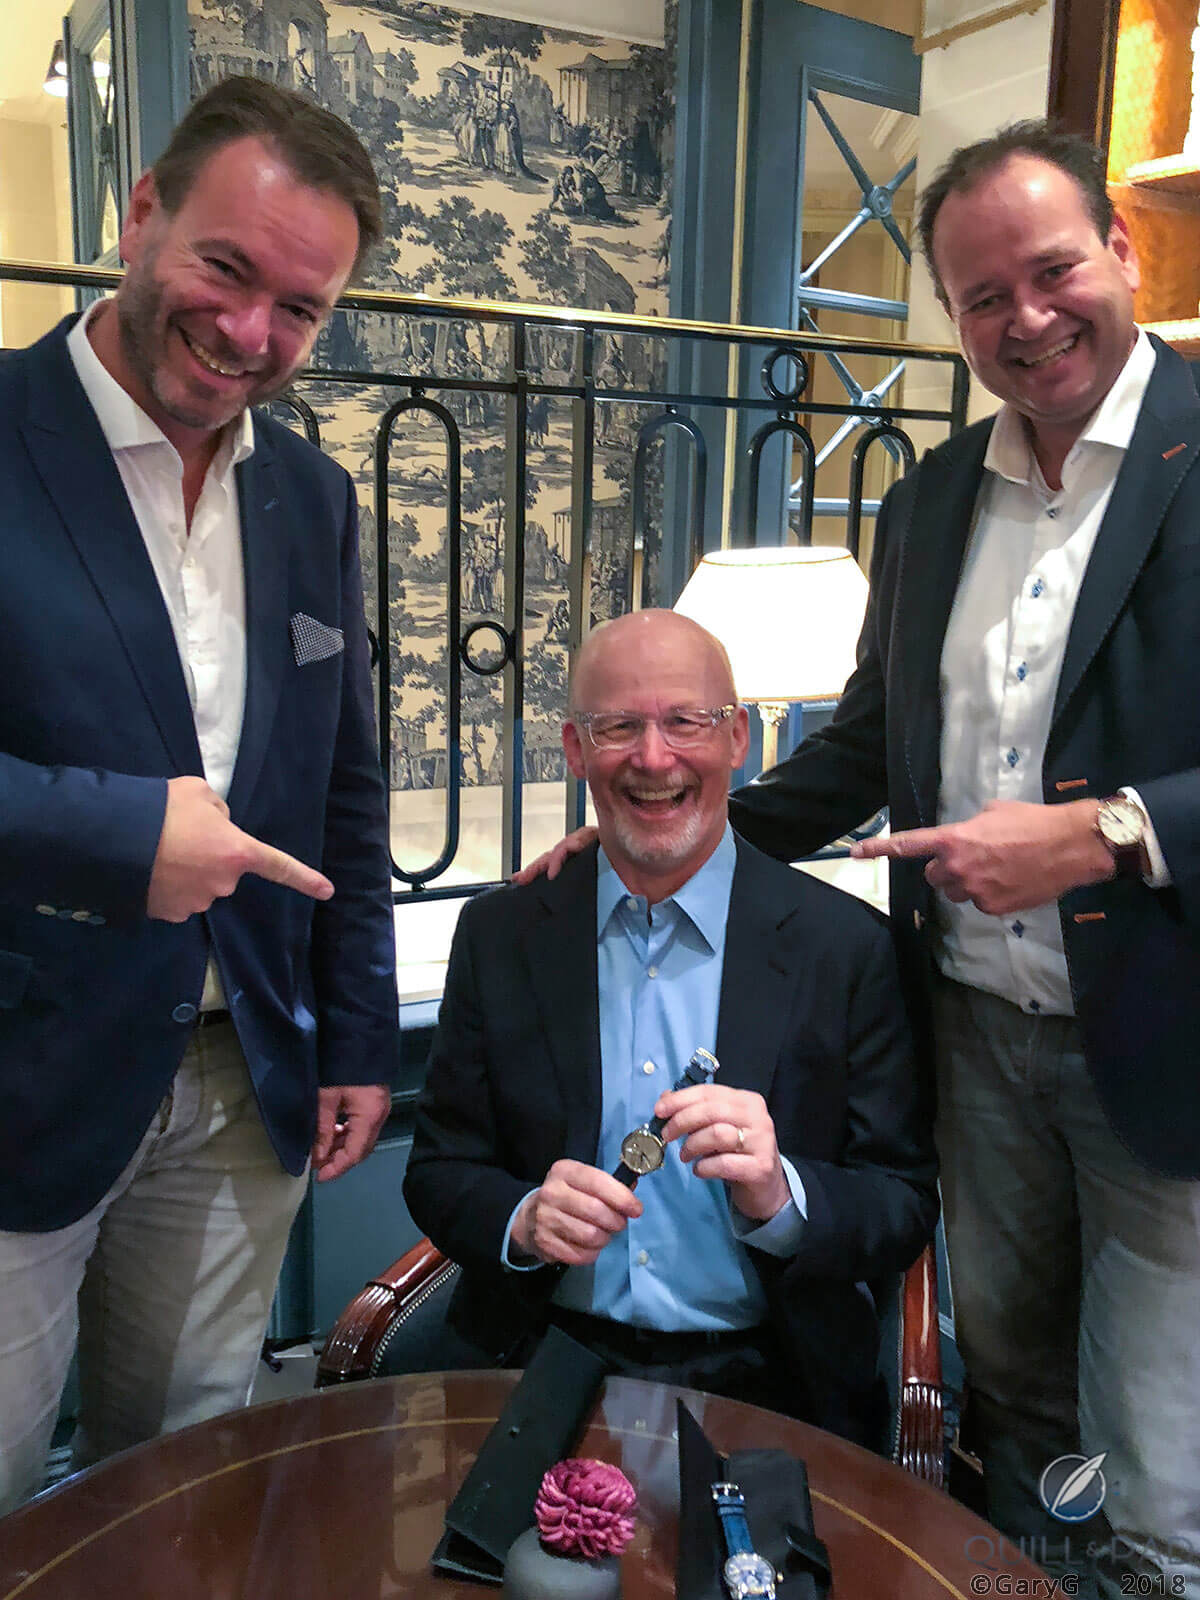 Say gouda: the author receives his watch from the Horological Brothers (photo courtesy BartC)